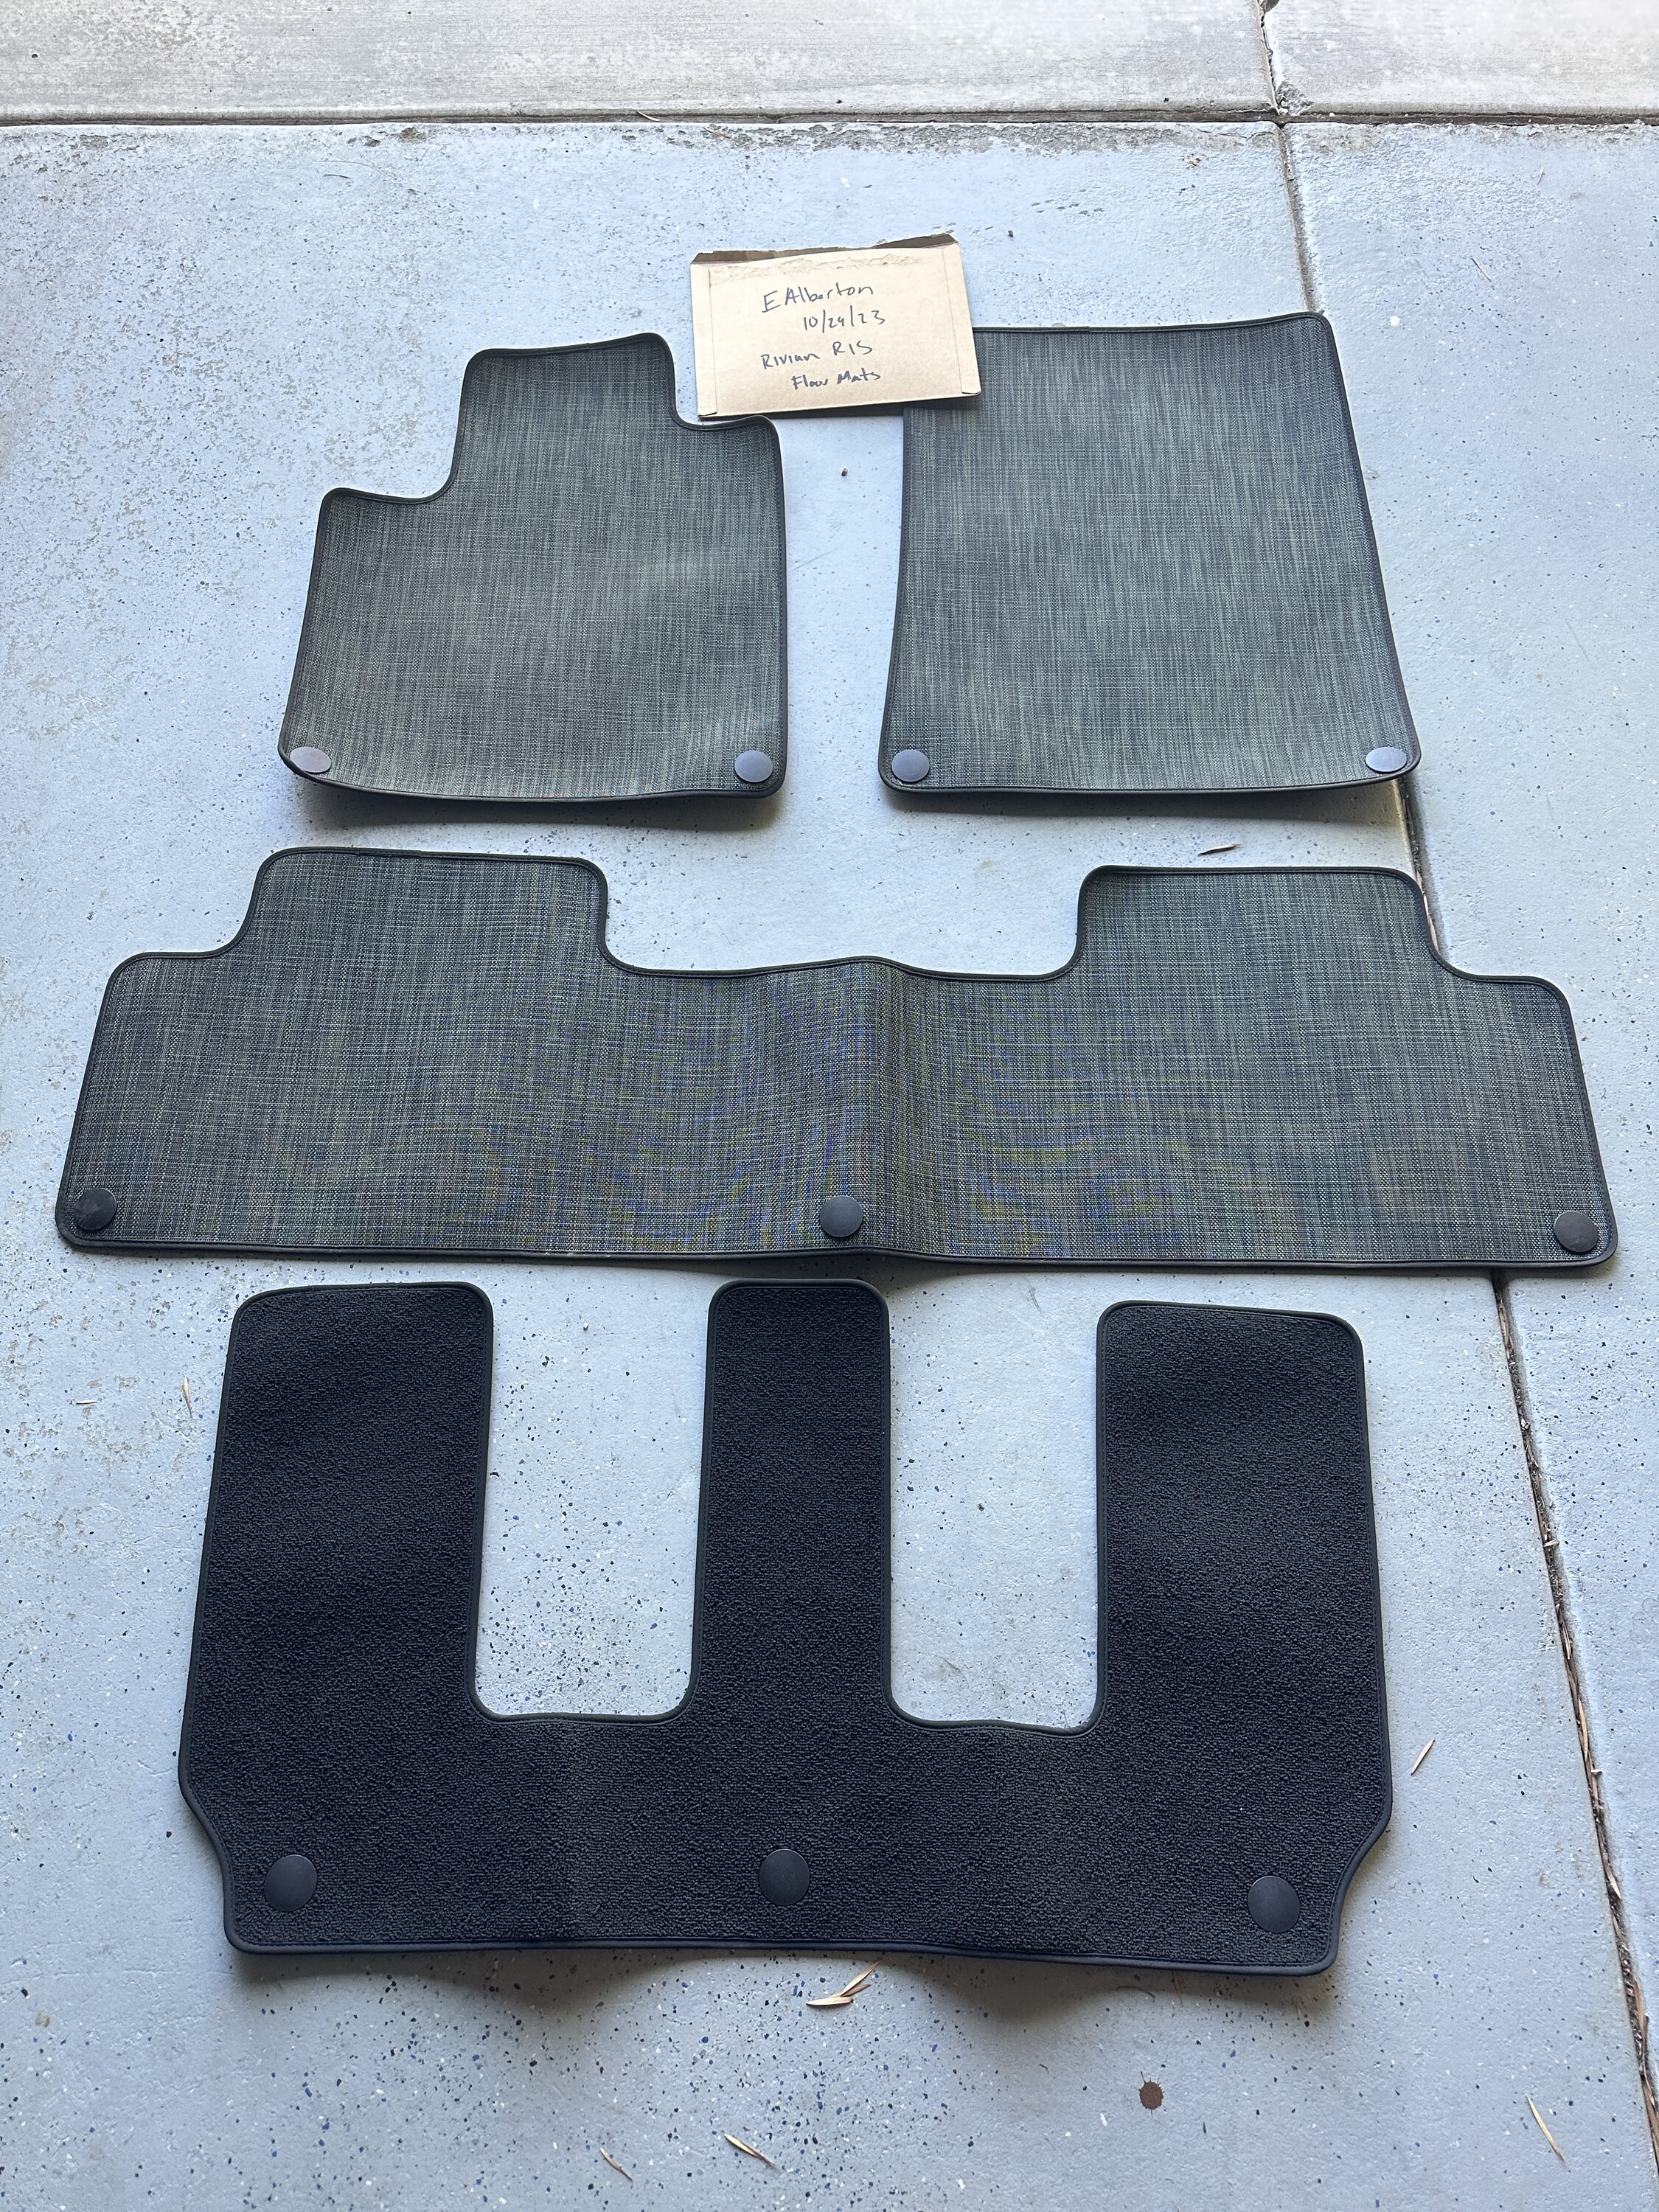 Rivian R1T R1S $50 R1S Floor Mats - New never used IMG_5771